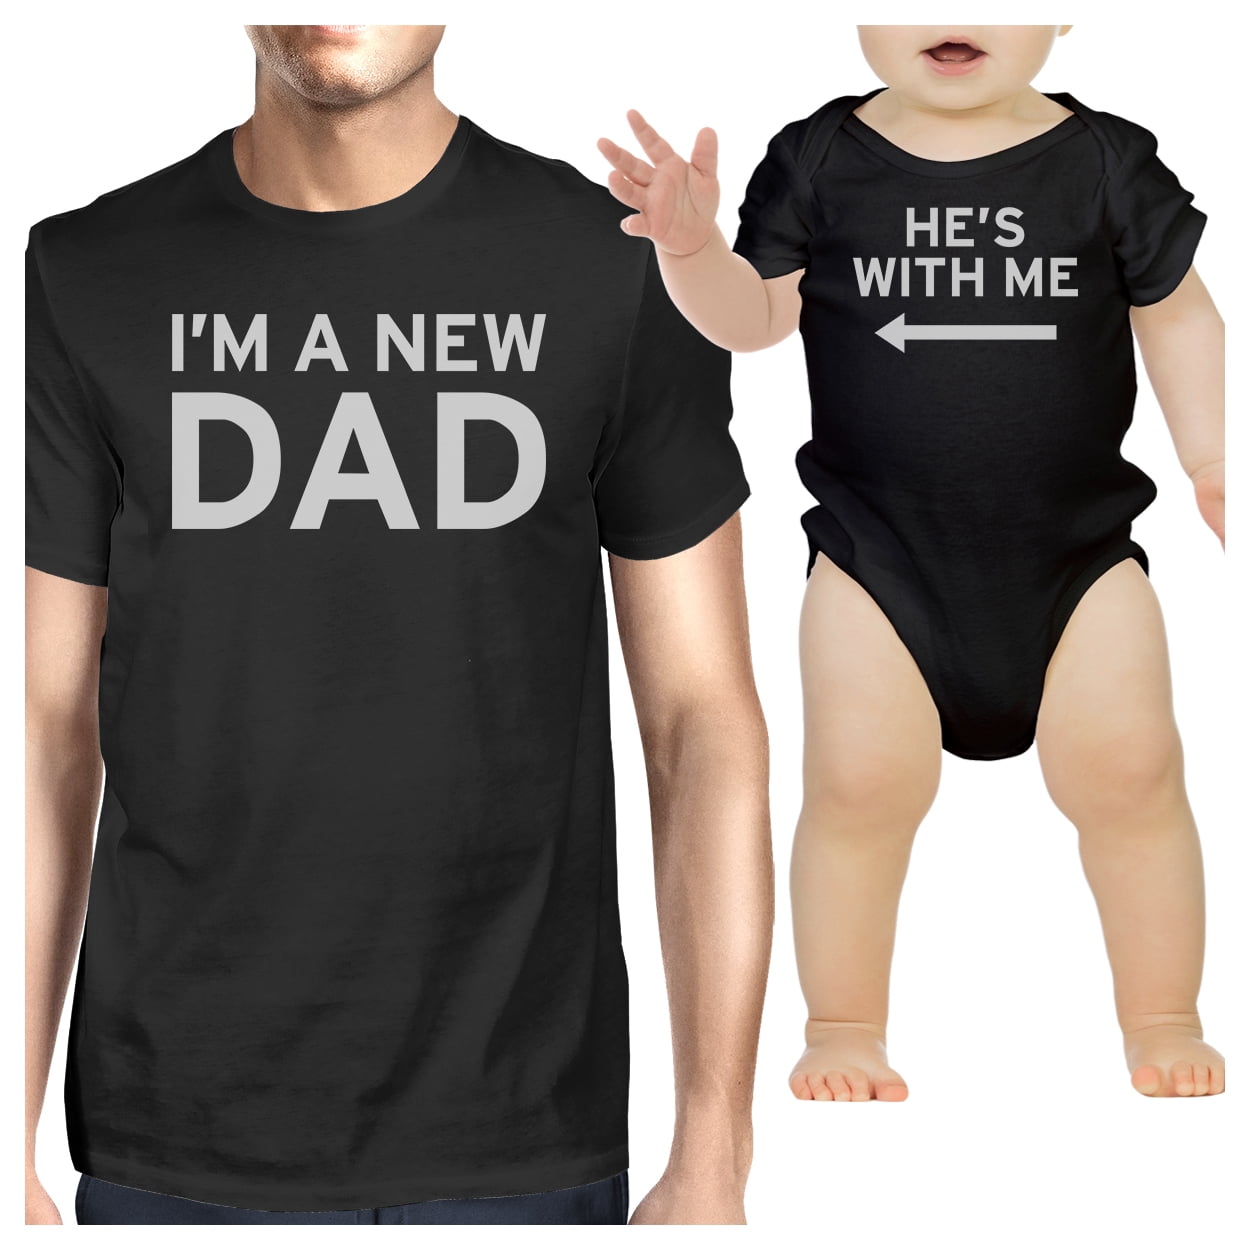 gag gifts for dad at baby shower